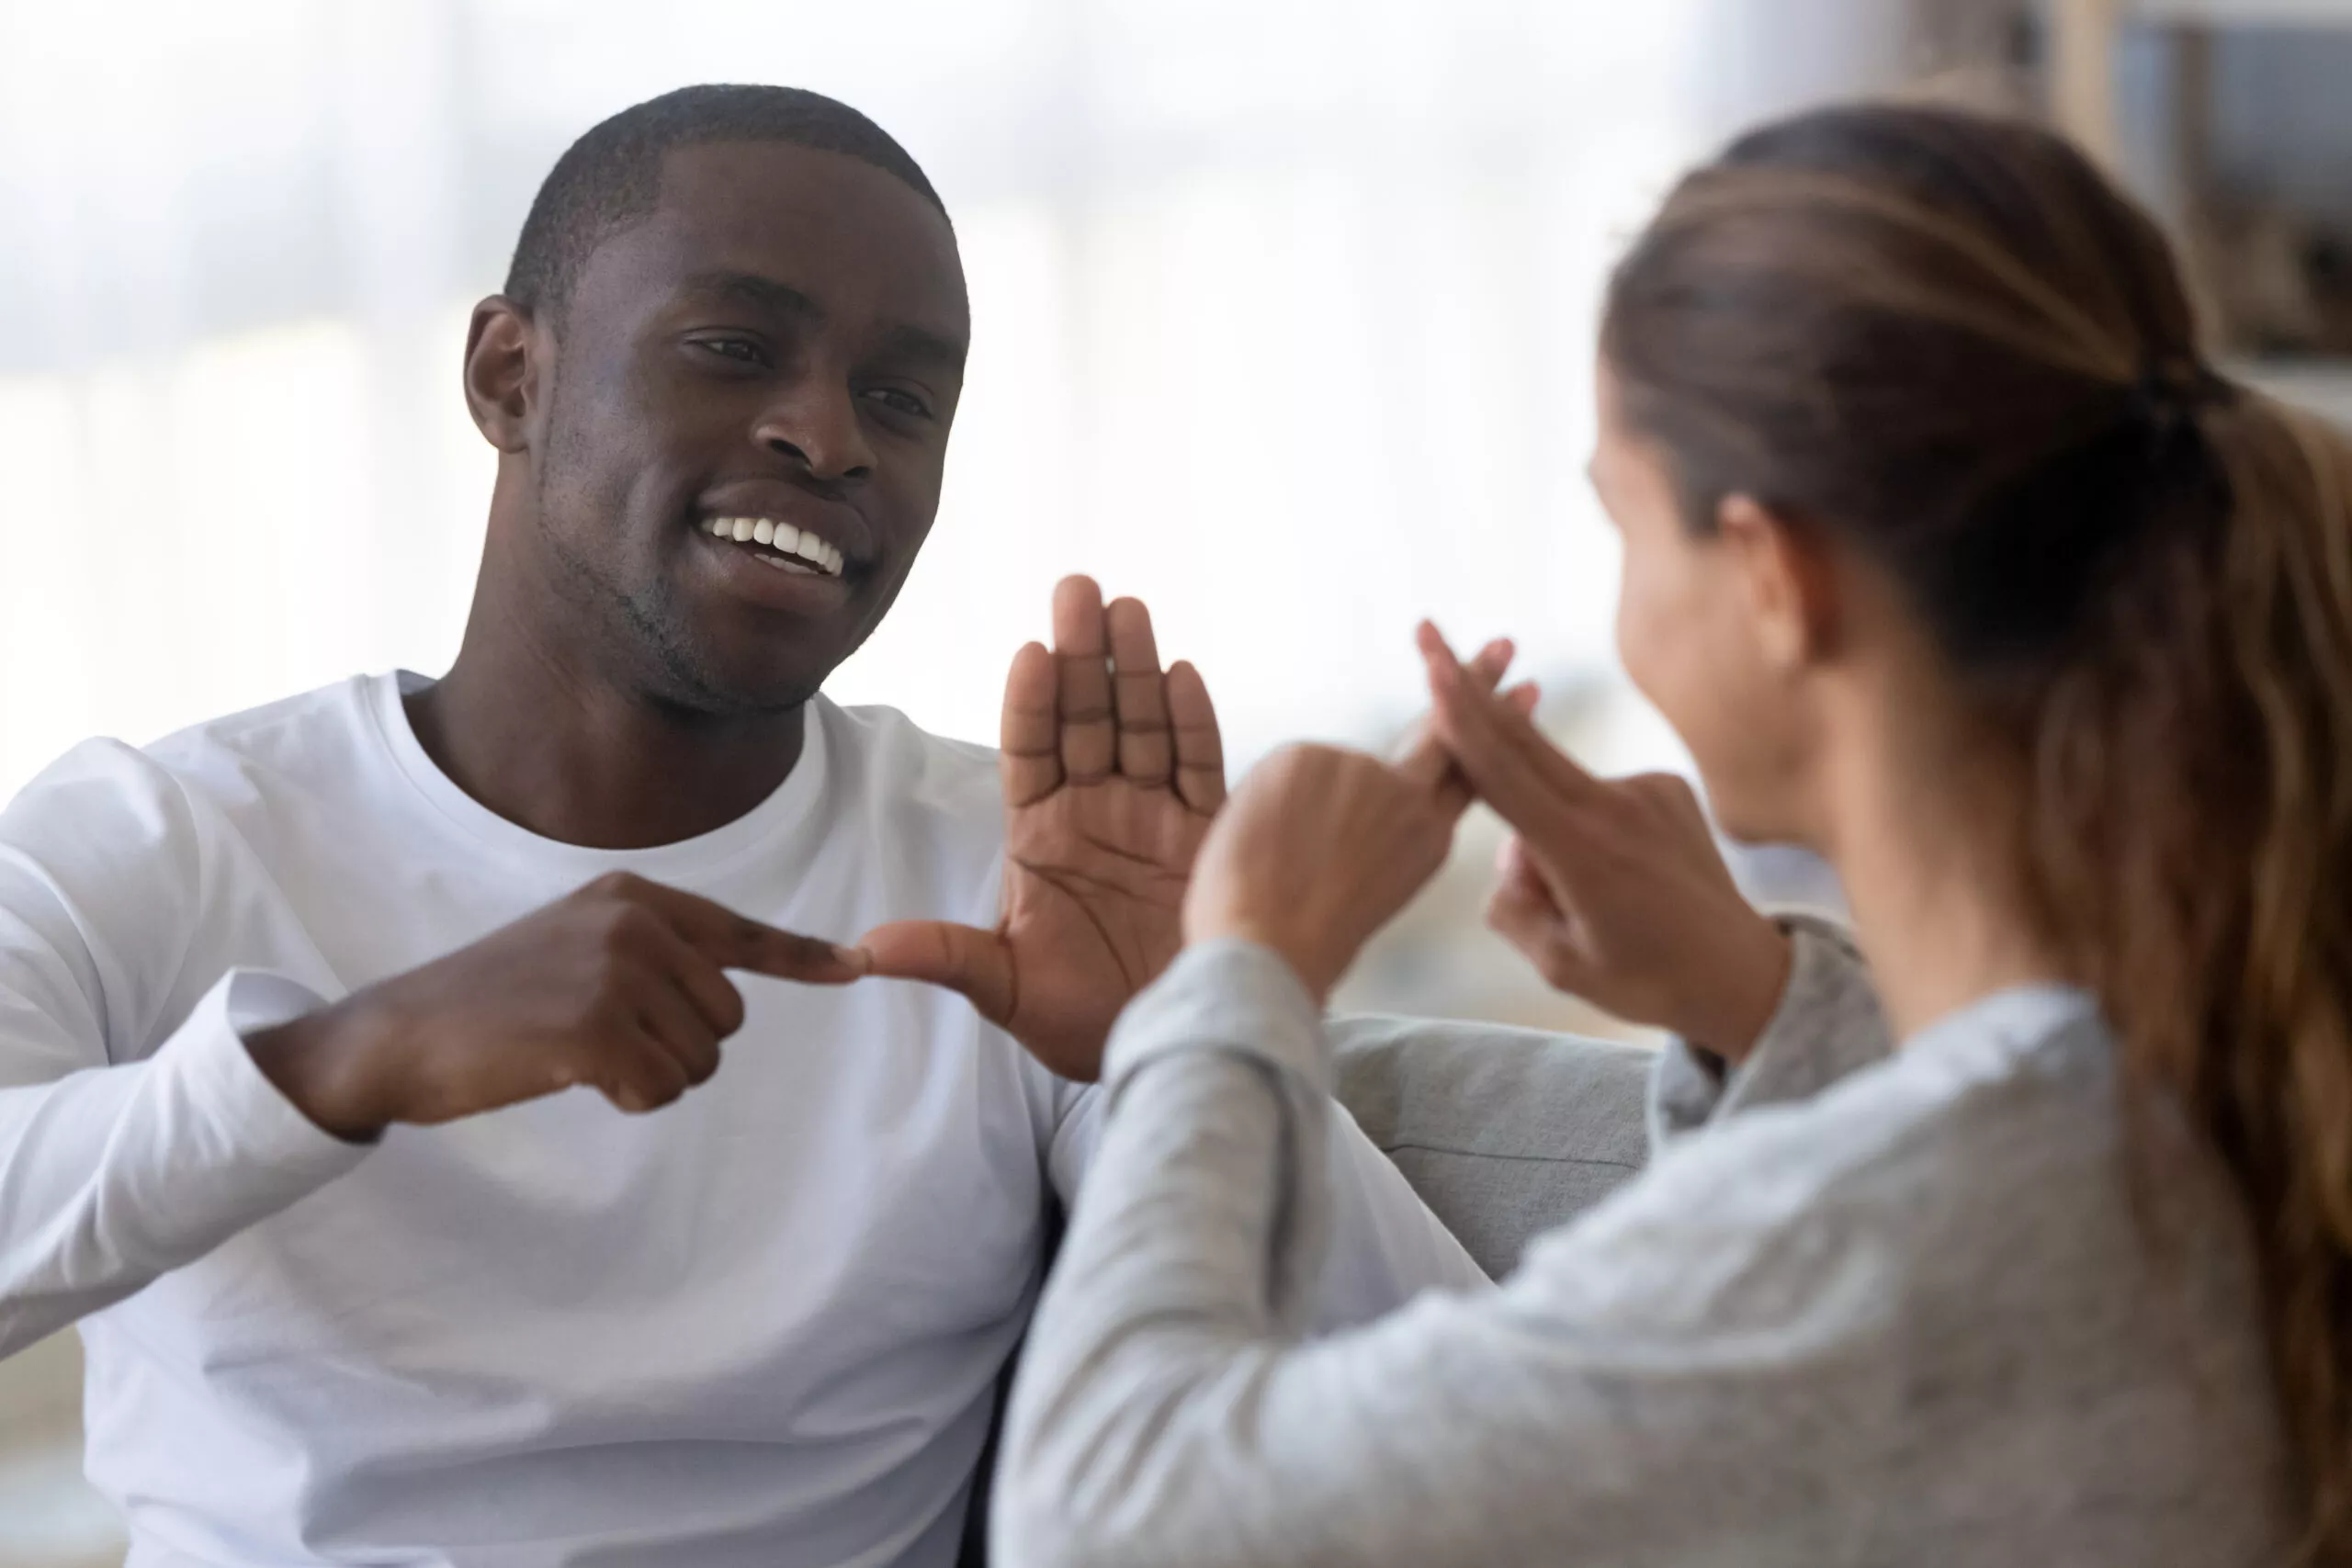 Image of two people talking to each other using sign language